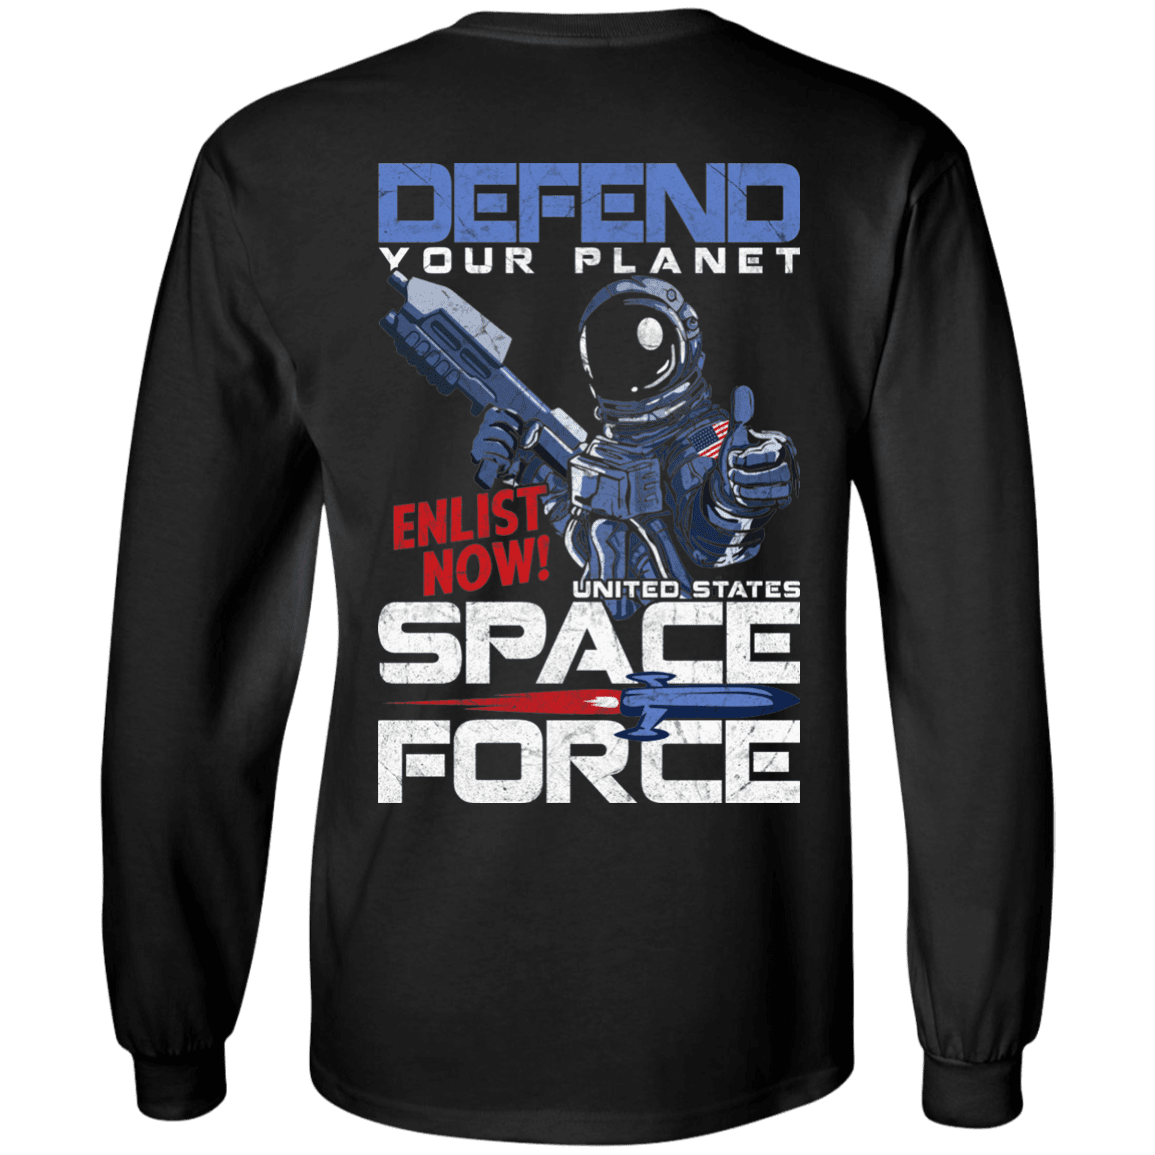 Military T-Shirt "Defend Your Planet Space Force" Men Back-TShirt-General-Veterans Nation